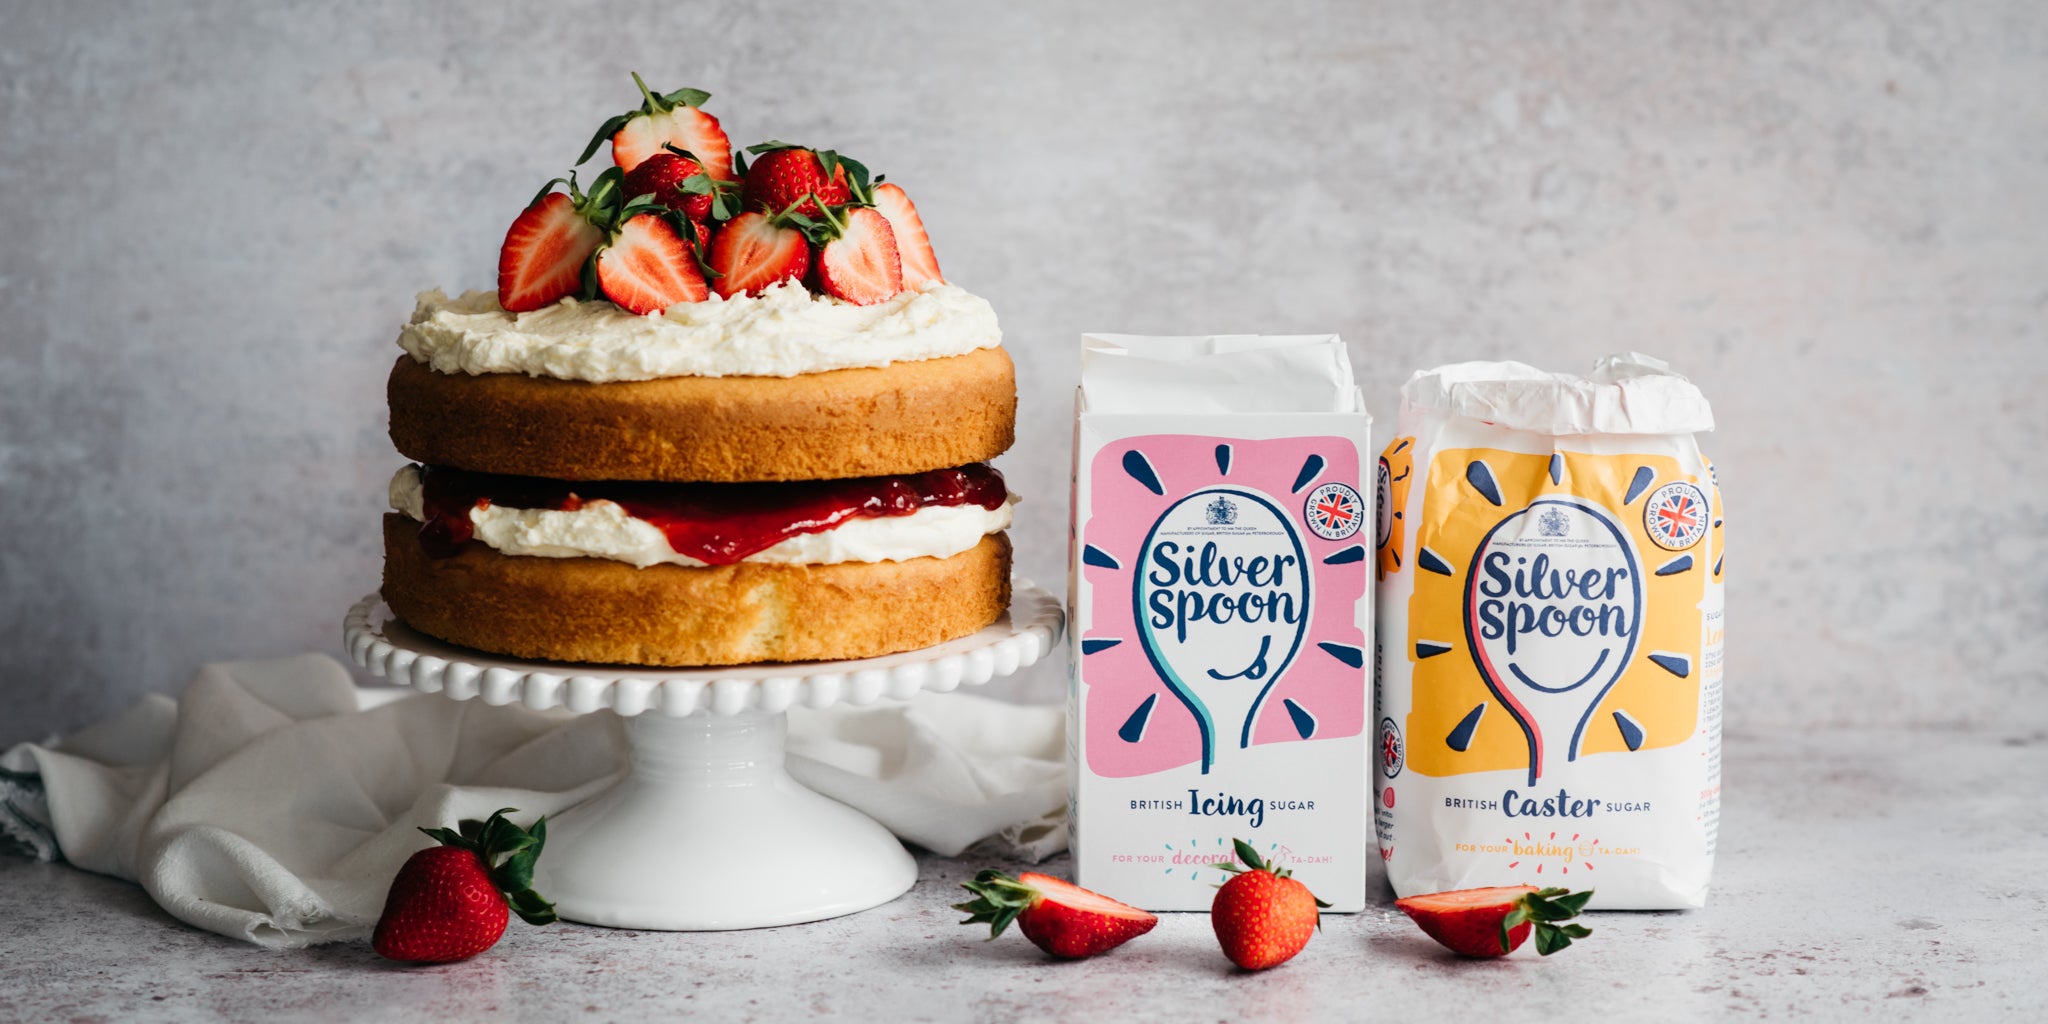 Show-stopping Gluten Free Victoria Sponge served on a cake stand and topped with sliced strawberries. Next to a bag of Silver Spoon Icing Sugar and Silver Spoon Caster Sugar